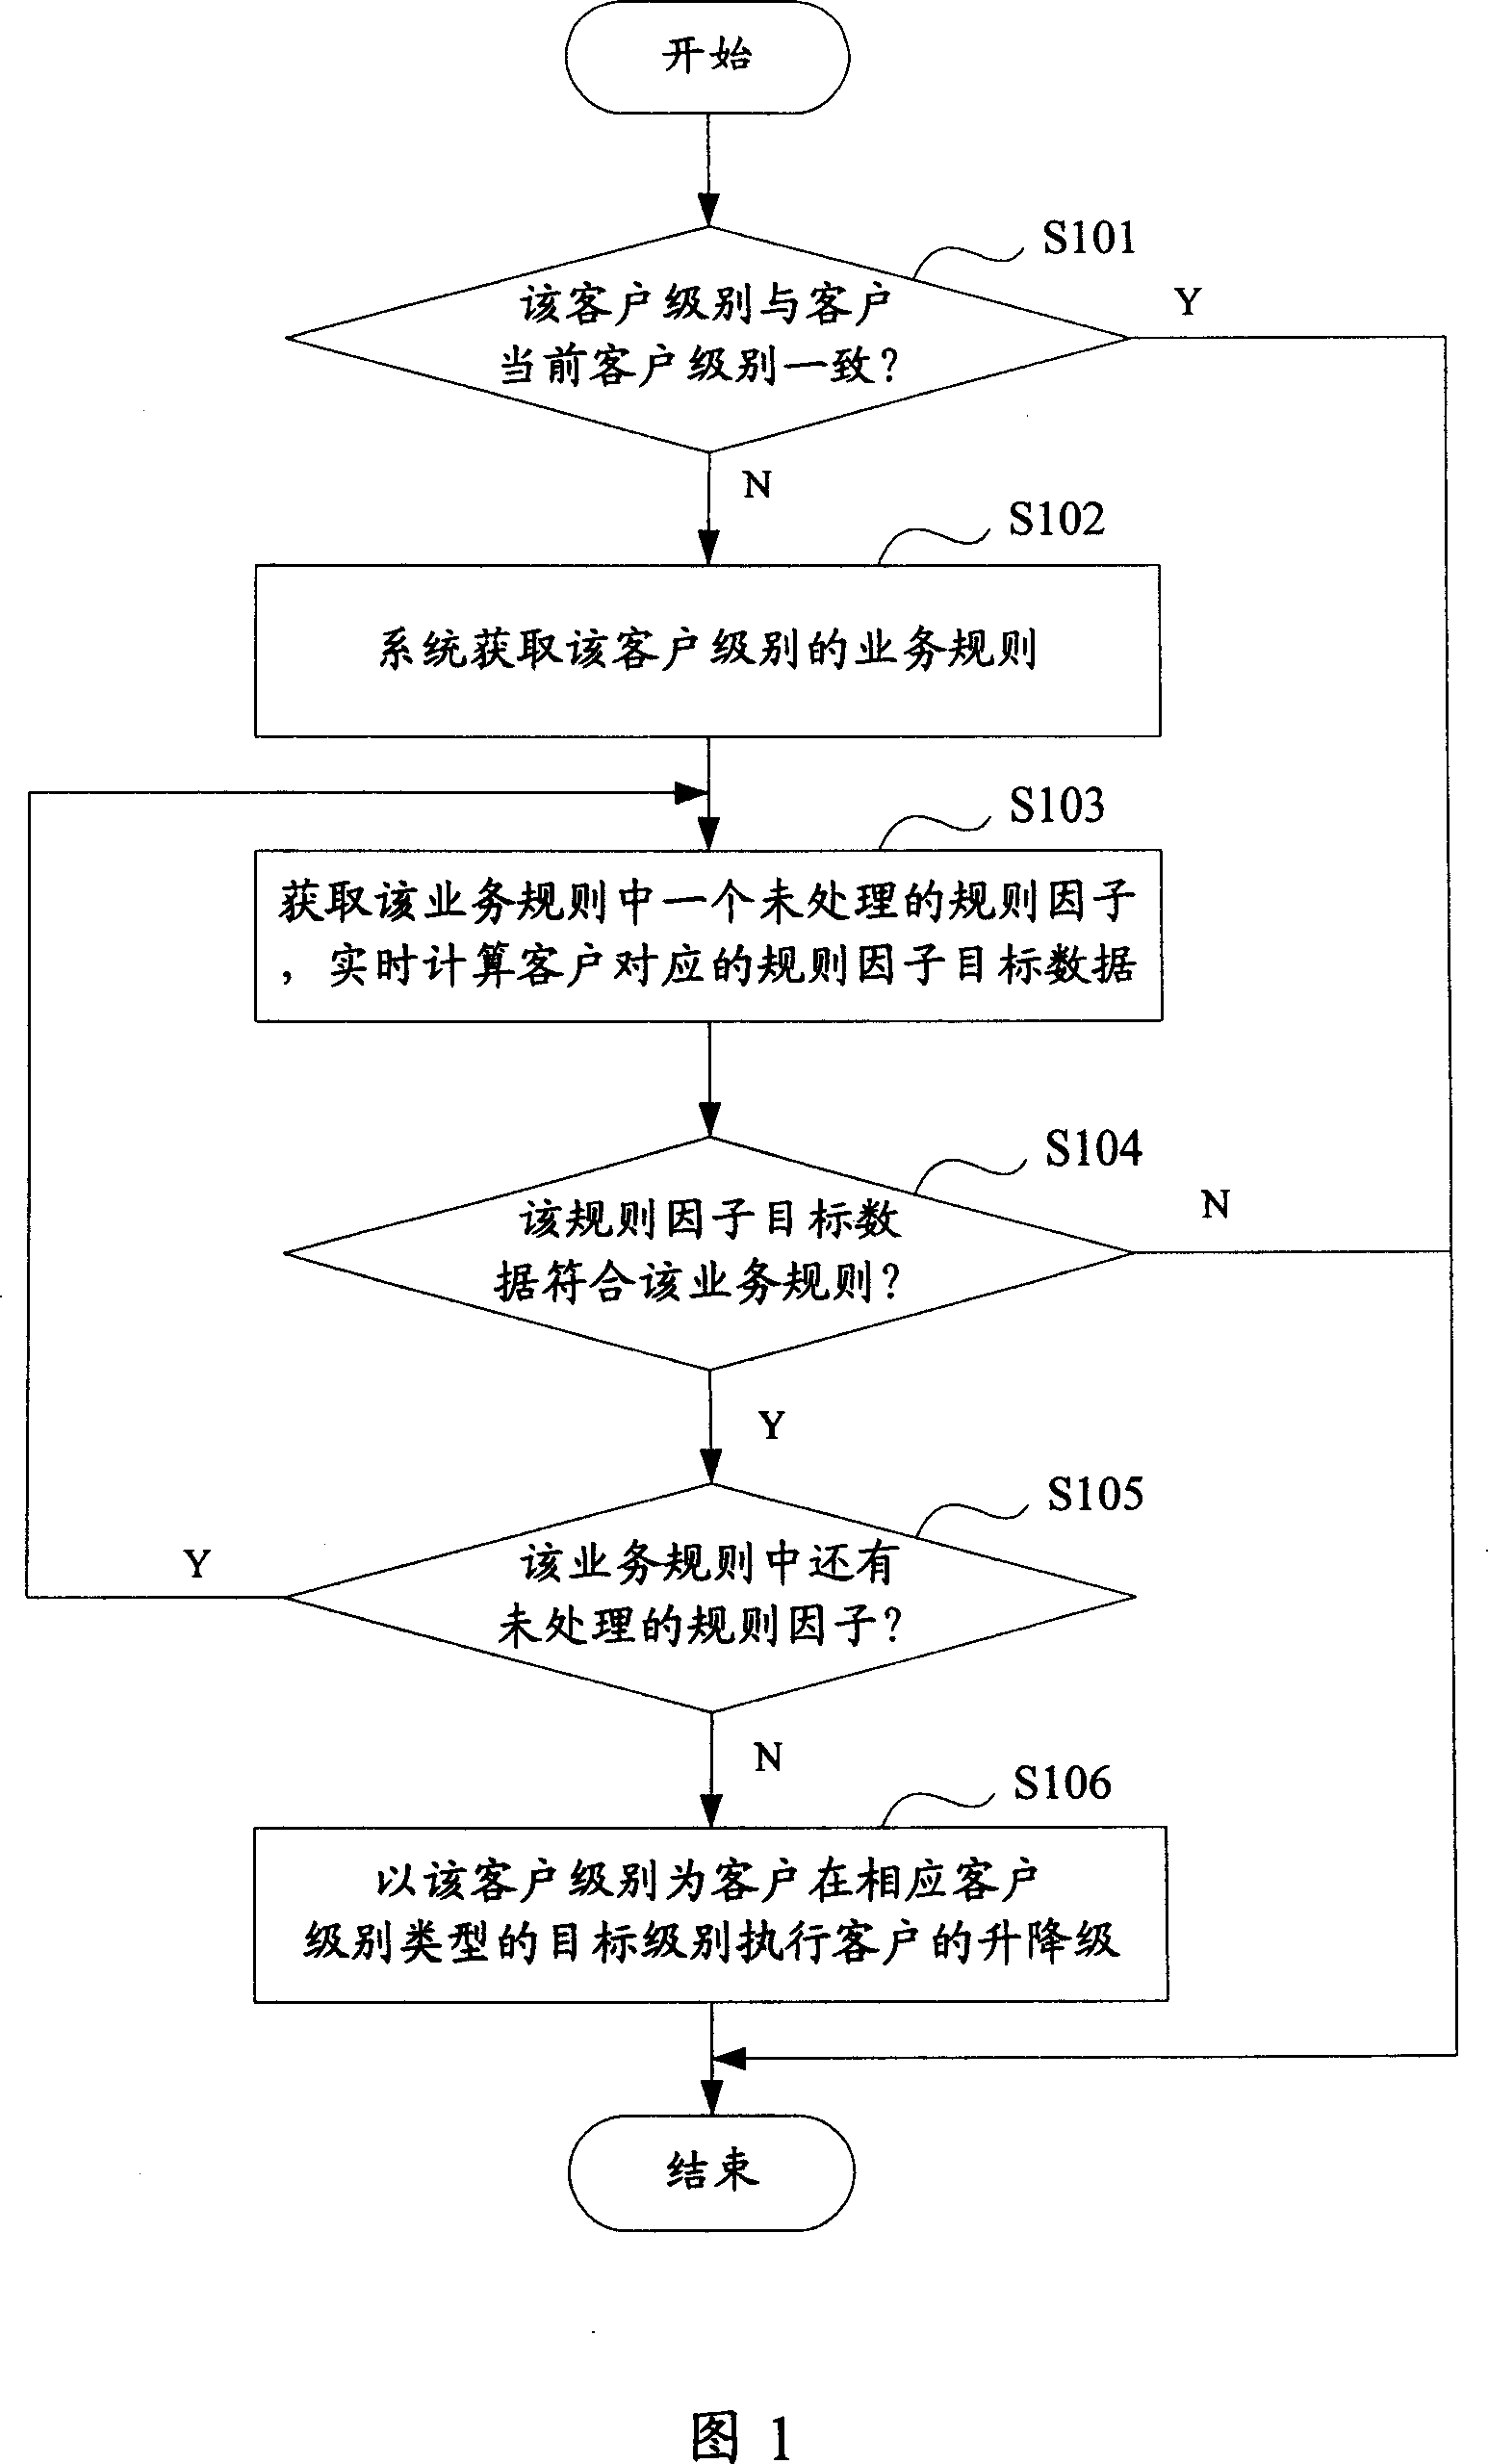 Method, device, and system for maintaining levels of clients